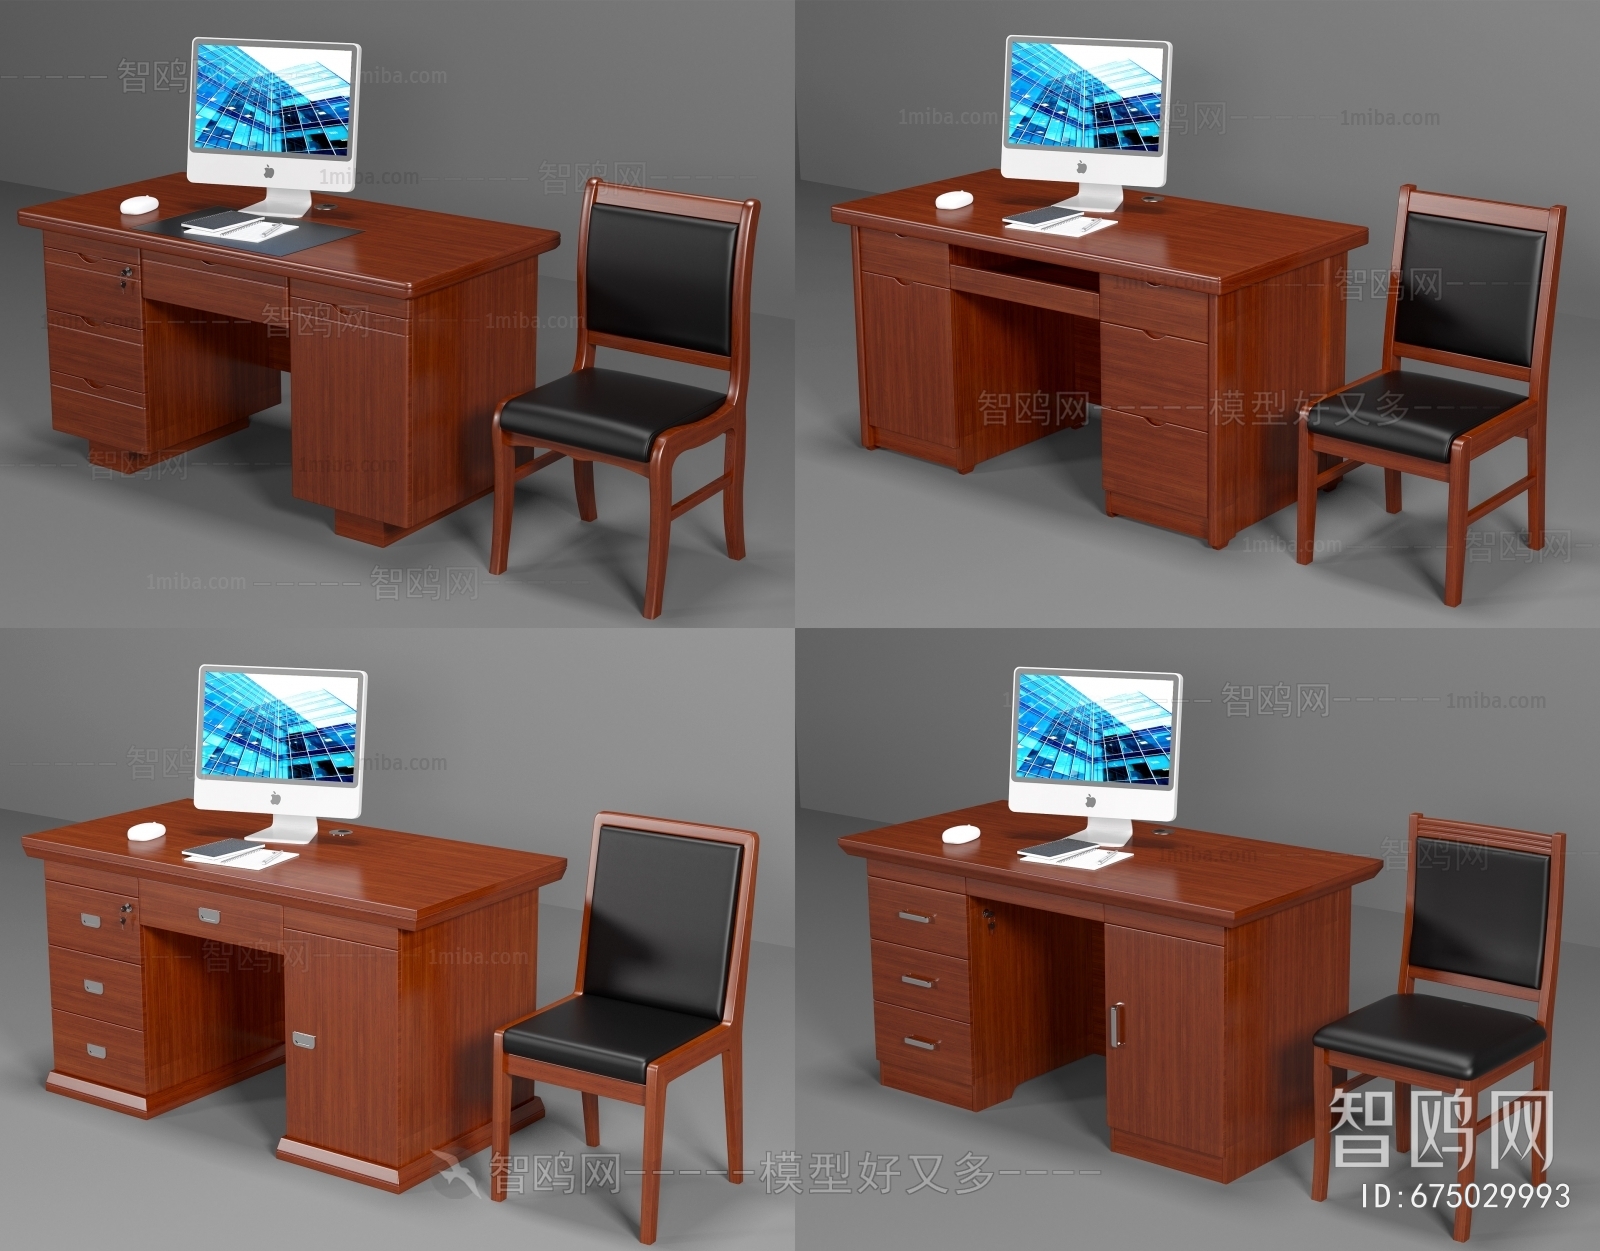 Chinese Style Office Table